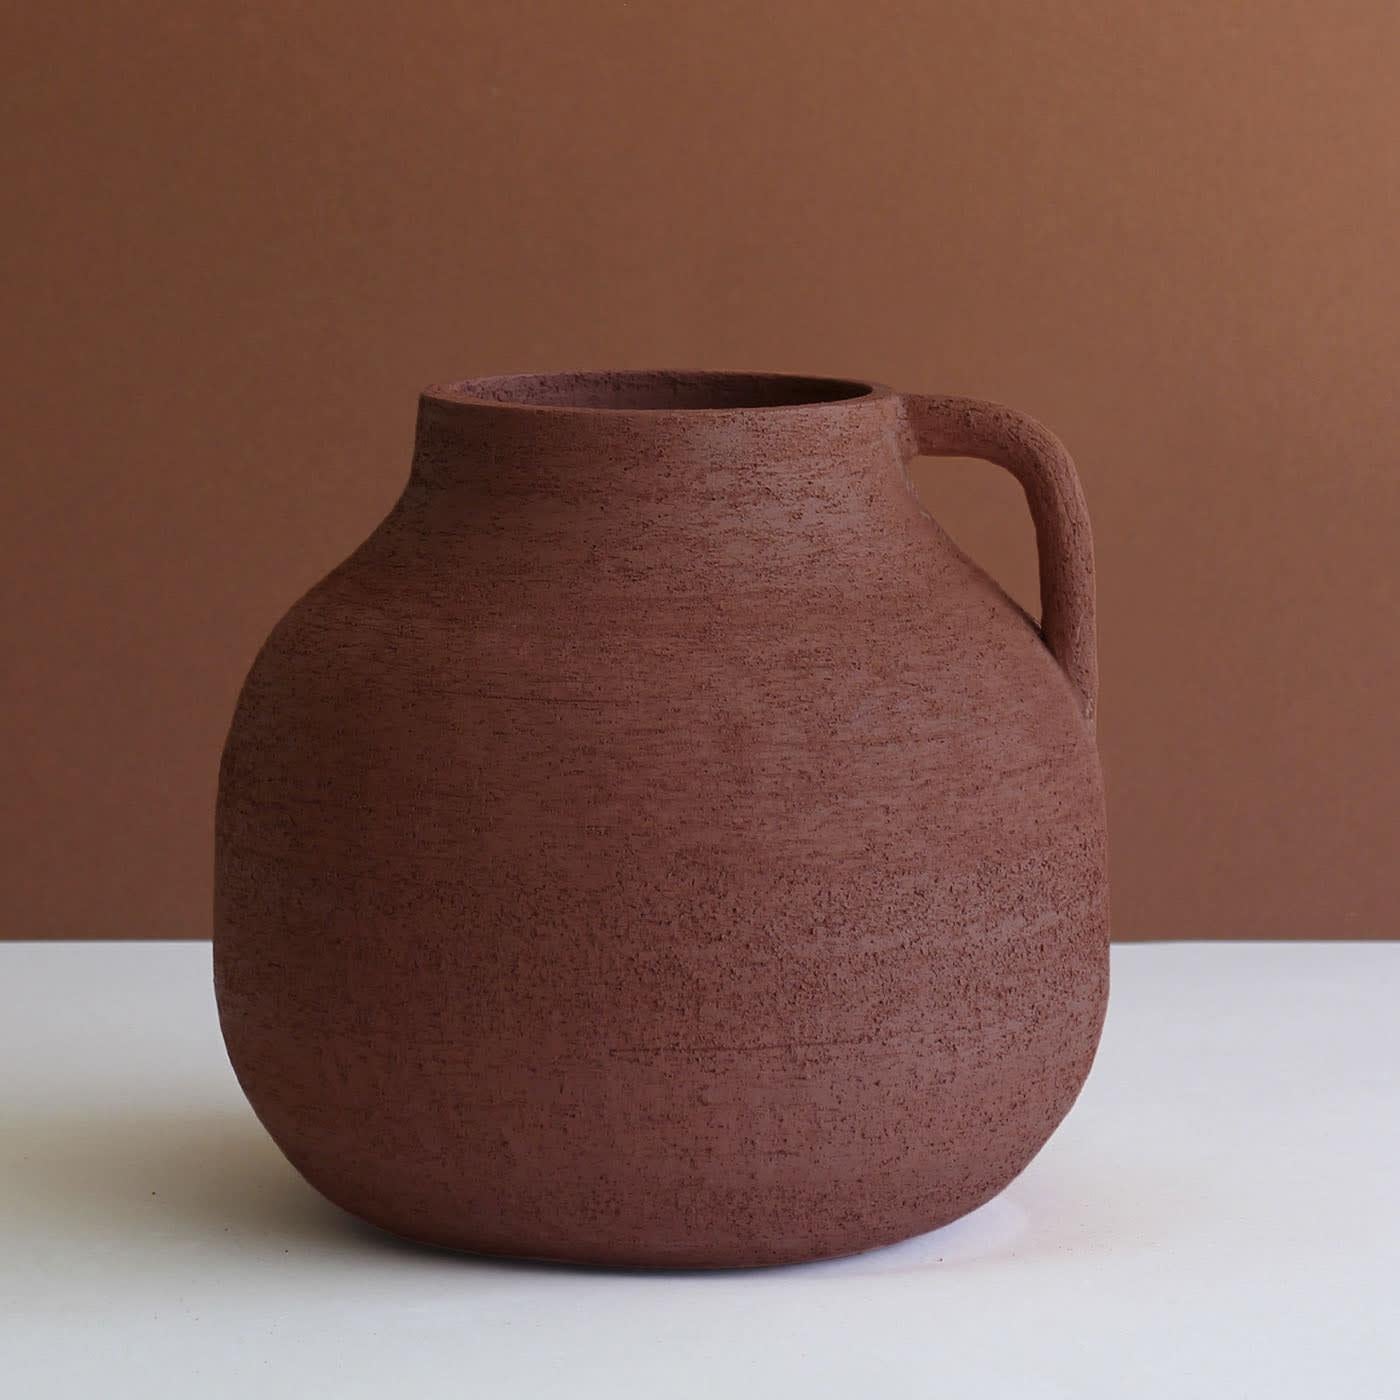 Tactile dynamism meets clean lines in this singular decorative amphora. Showcasing a refined scratched texture, it is fashioned of stoneware and offered in a deep shade of red sure to accent interiors with a dash of warmth. The meticulous